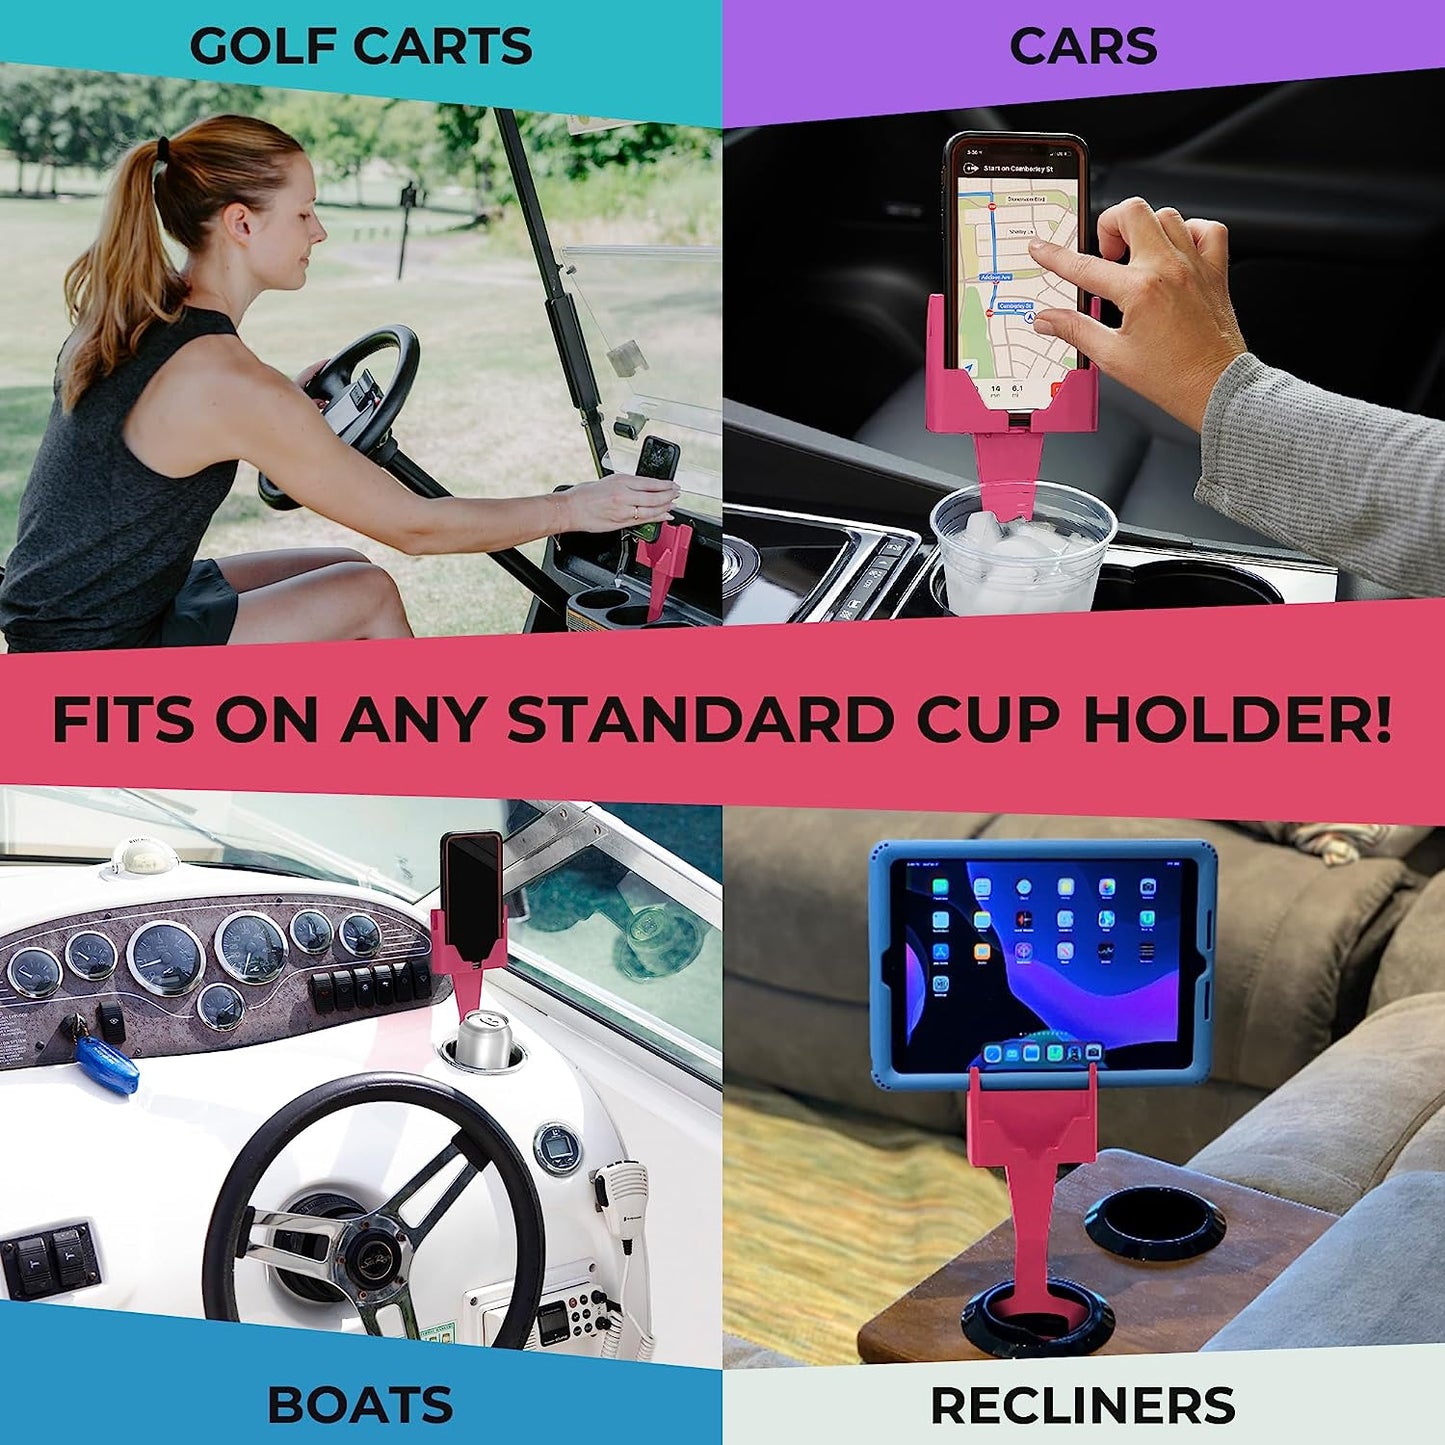 CELL PHONE SEAT – Phone & Cup Holder Made in USA – Fits Phones with or Without Cases in Vertical or Horizontal Position and Doesn’t Block Cup Holder, Charging Ports, Vents, Windshield (Pink Pack of 1)